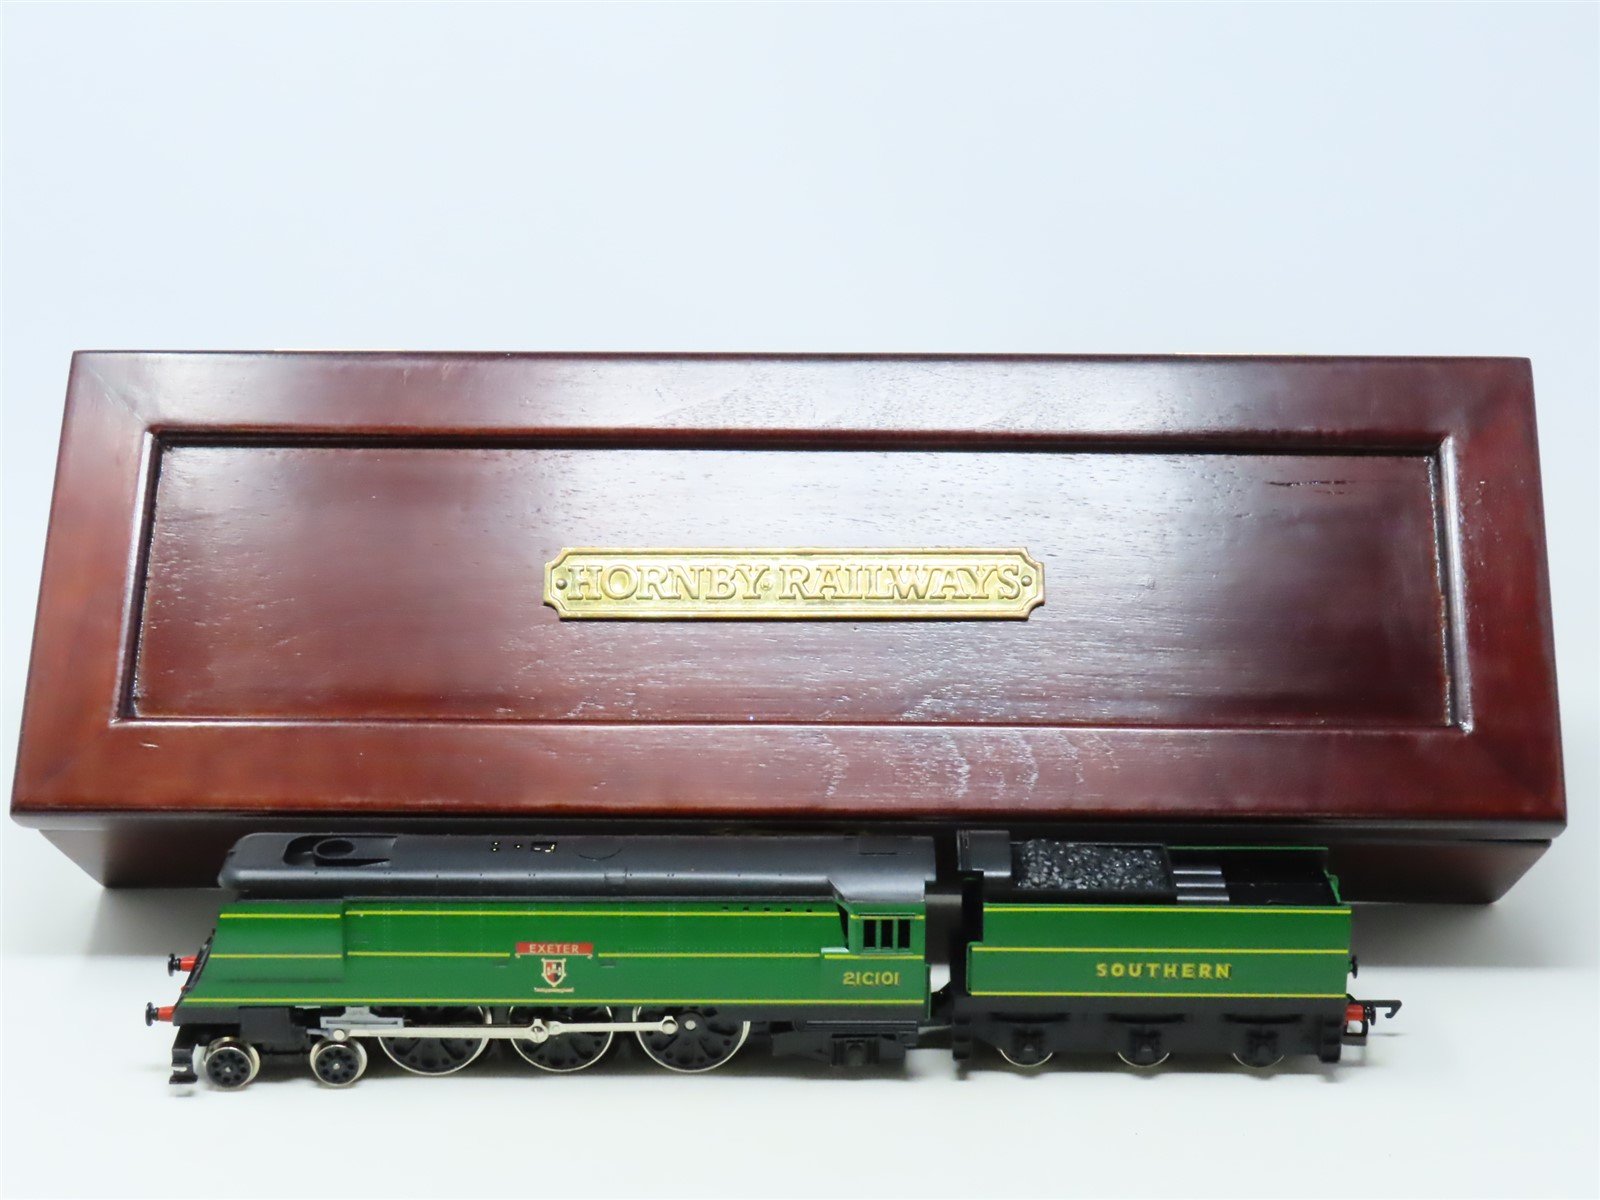 OO Hornby SR British Southern Railway 4-6-2 West Country Class Steam "Exeter"